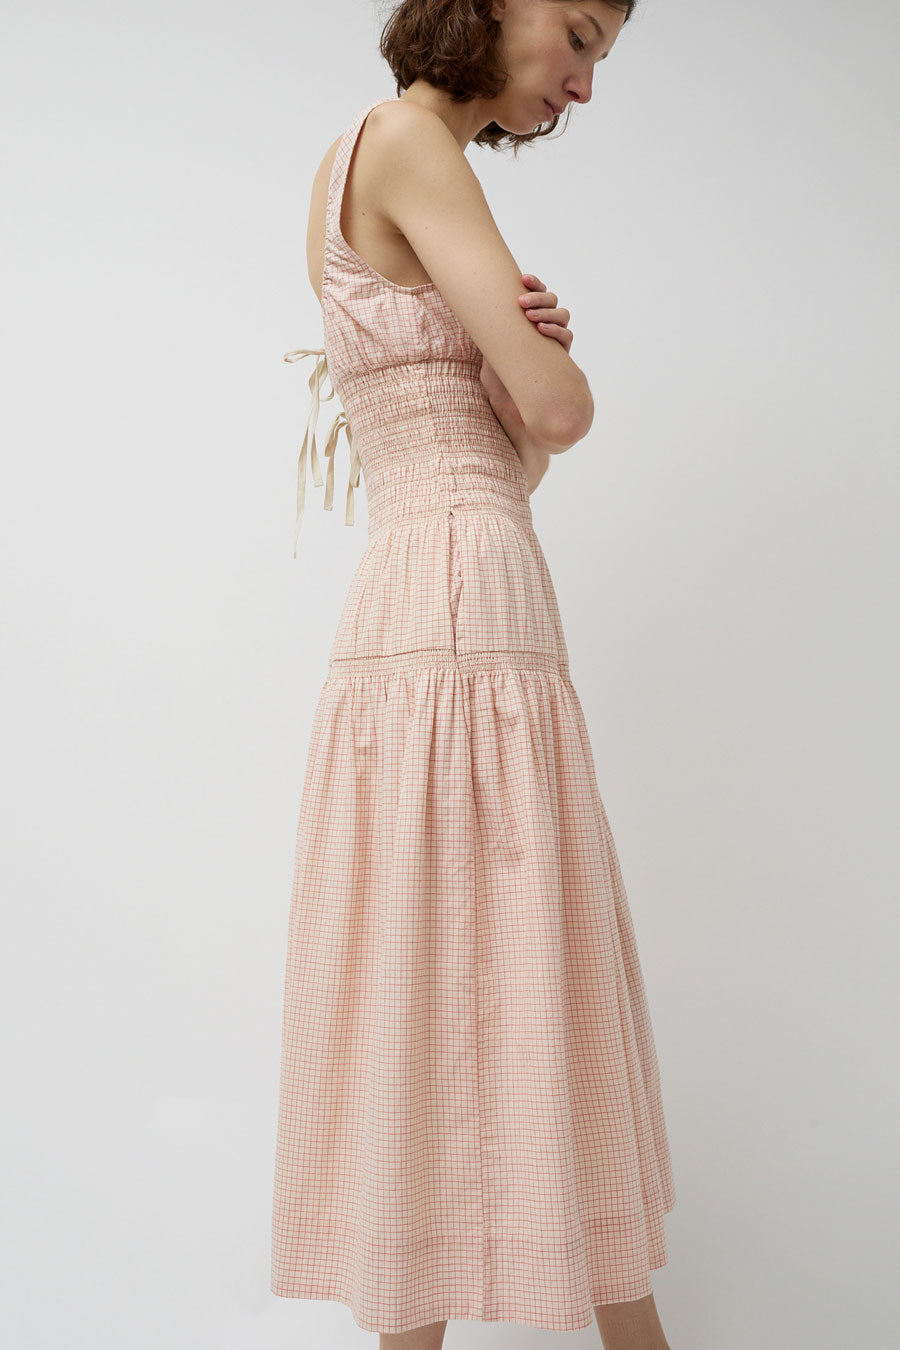 Maria Stanley Sigrid Dress in Piquillo Check